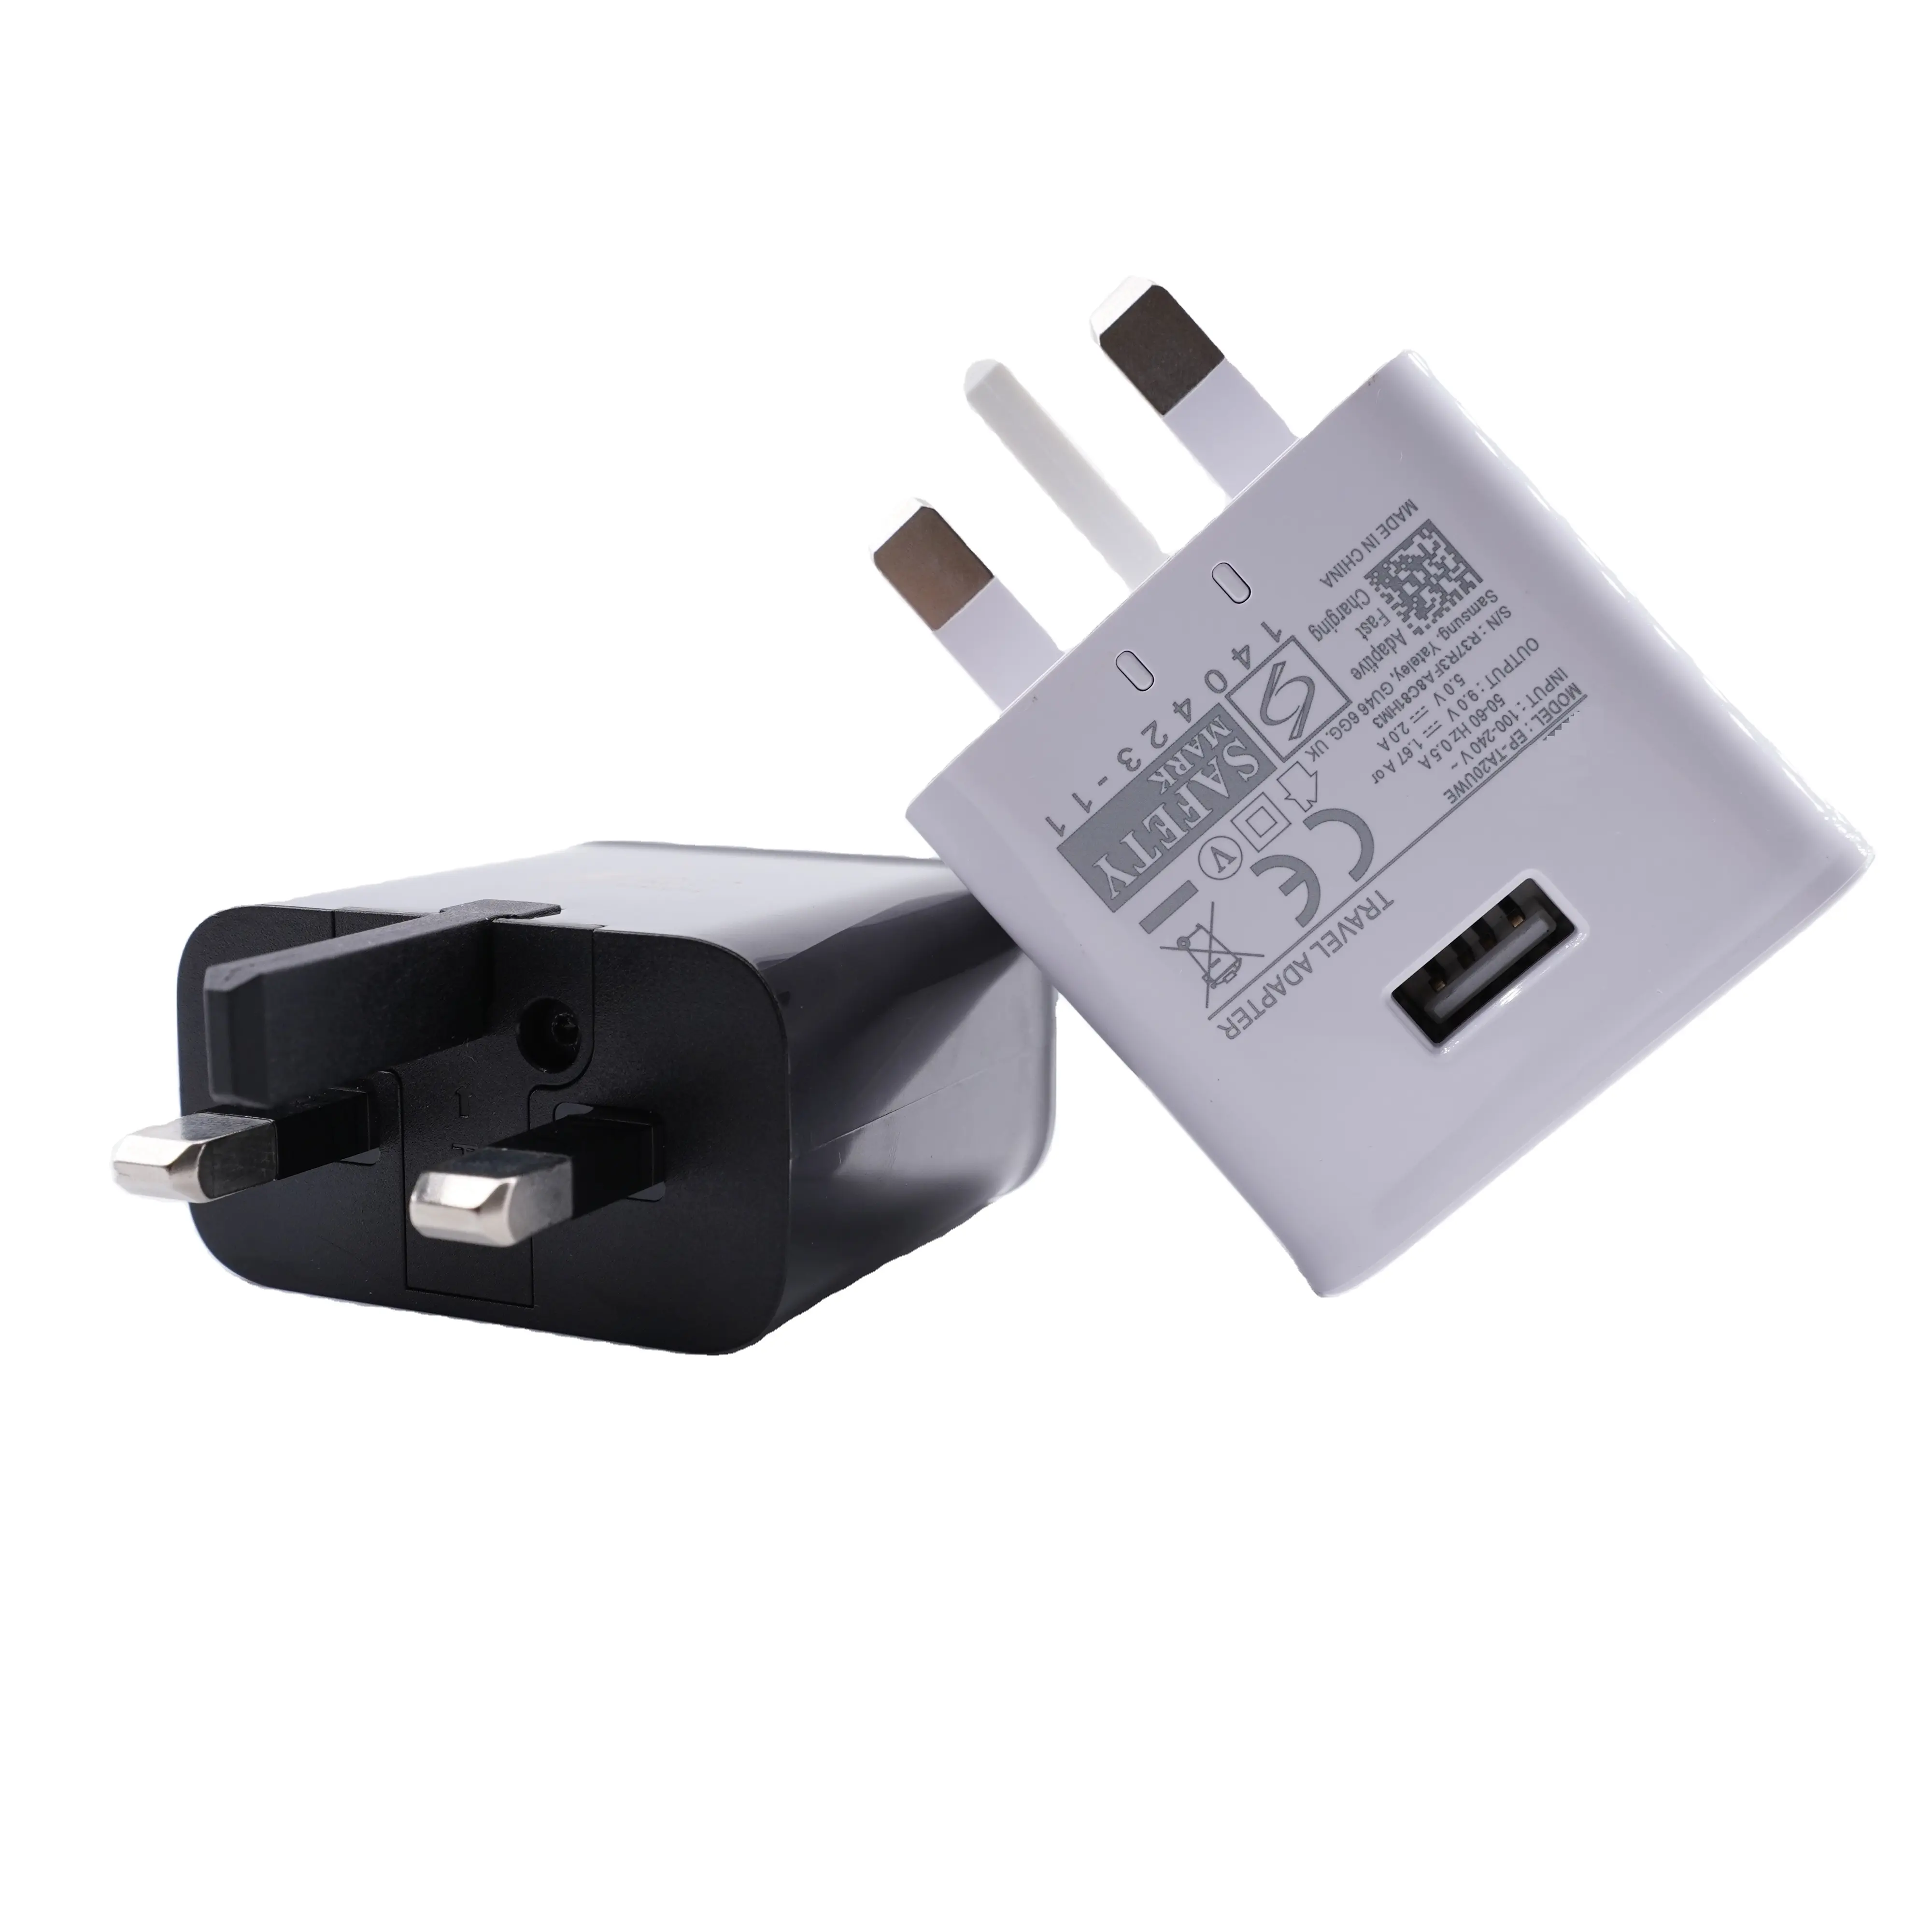 UK 3 Pin 2 Amp 15W Fast Mains Charger Micro USB Cable In White For Samsung